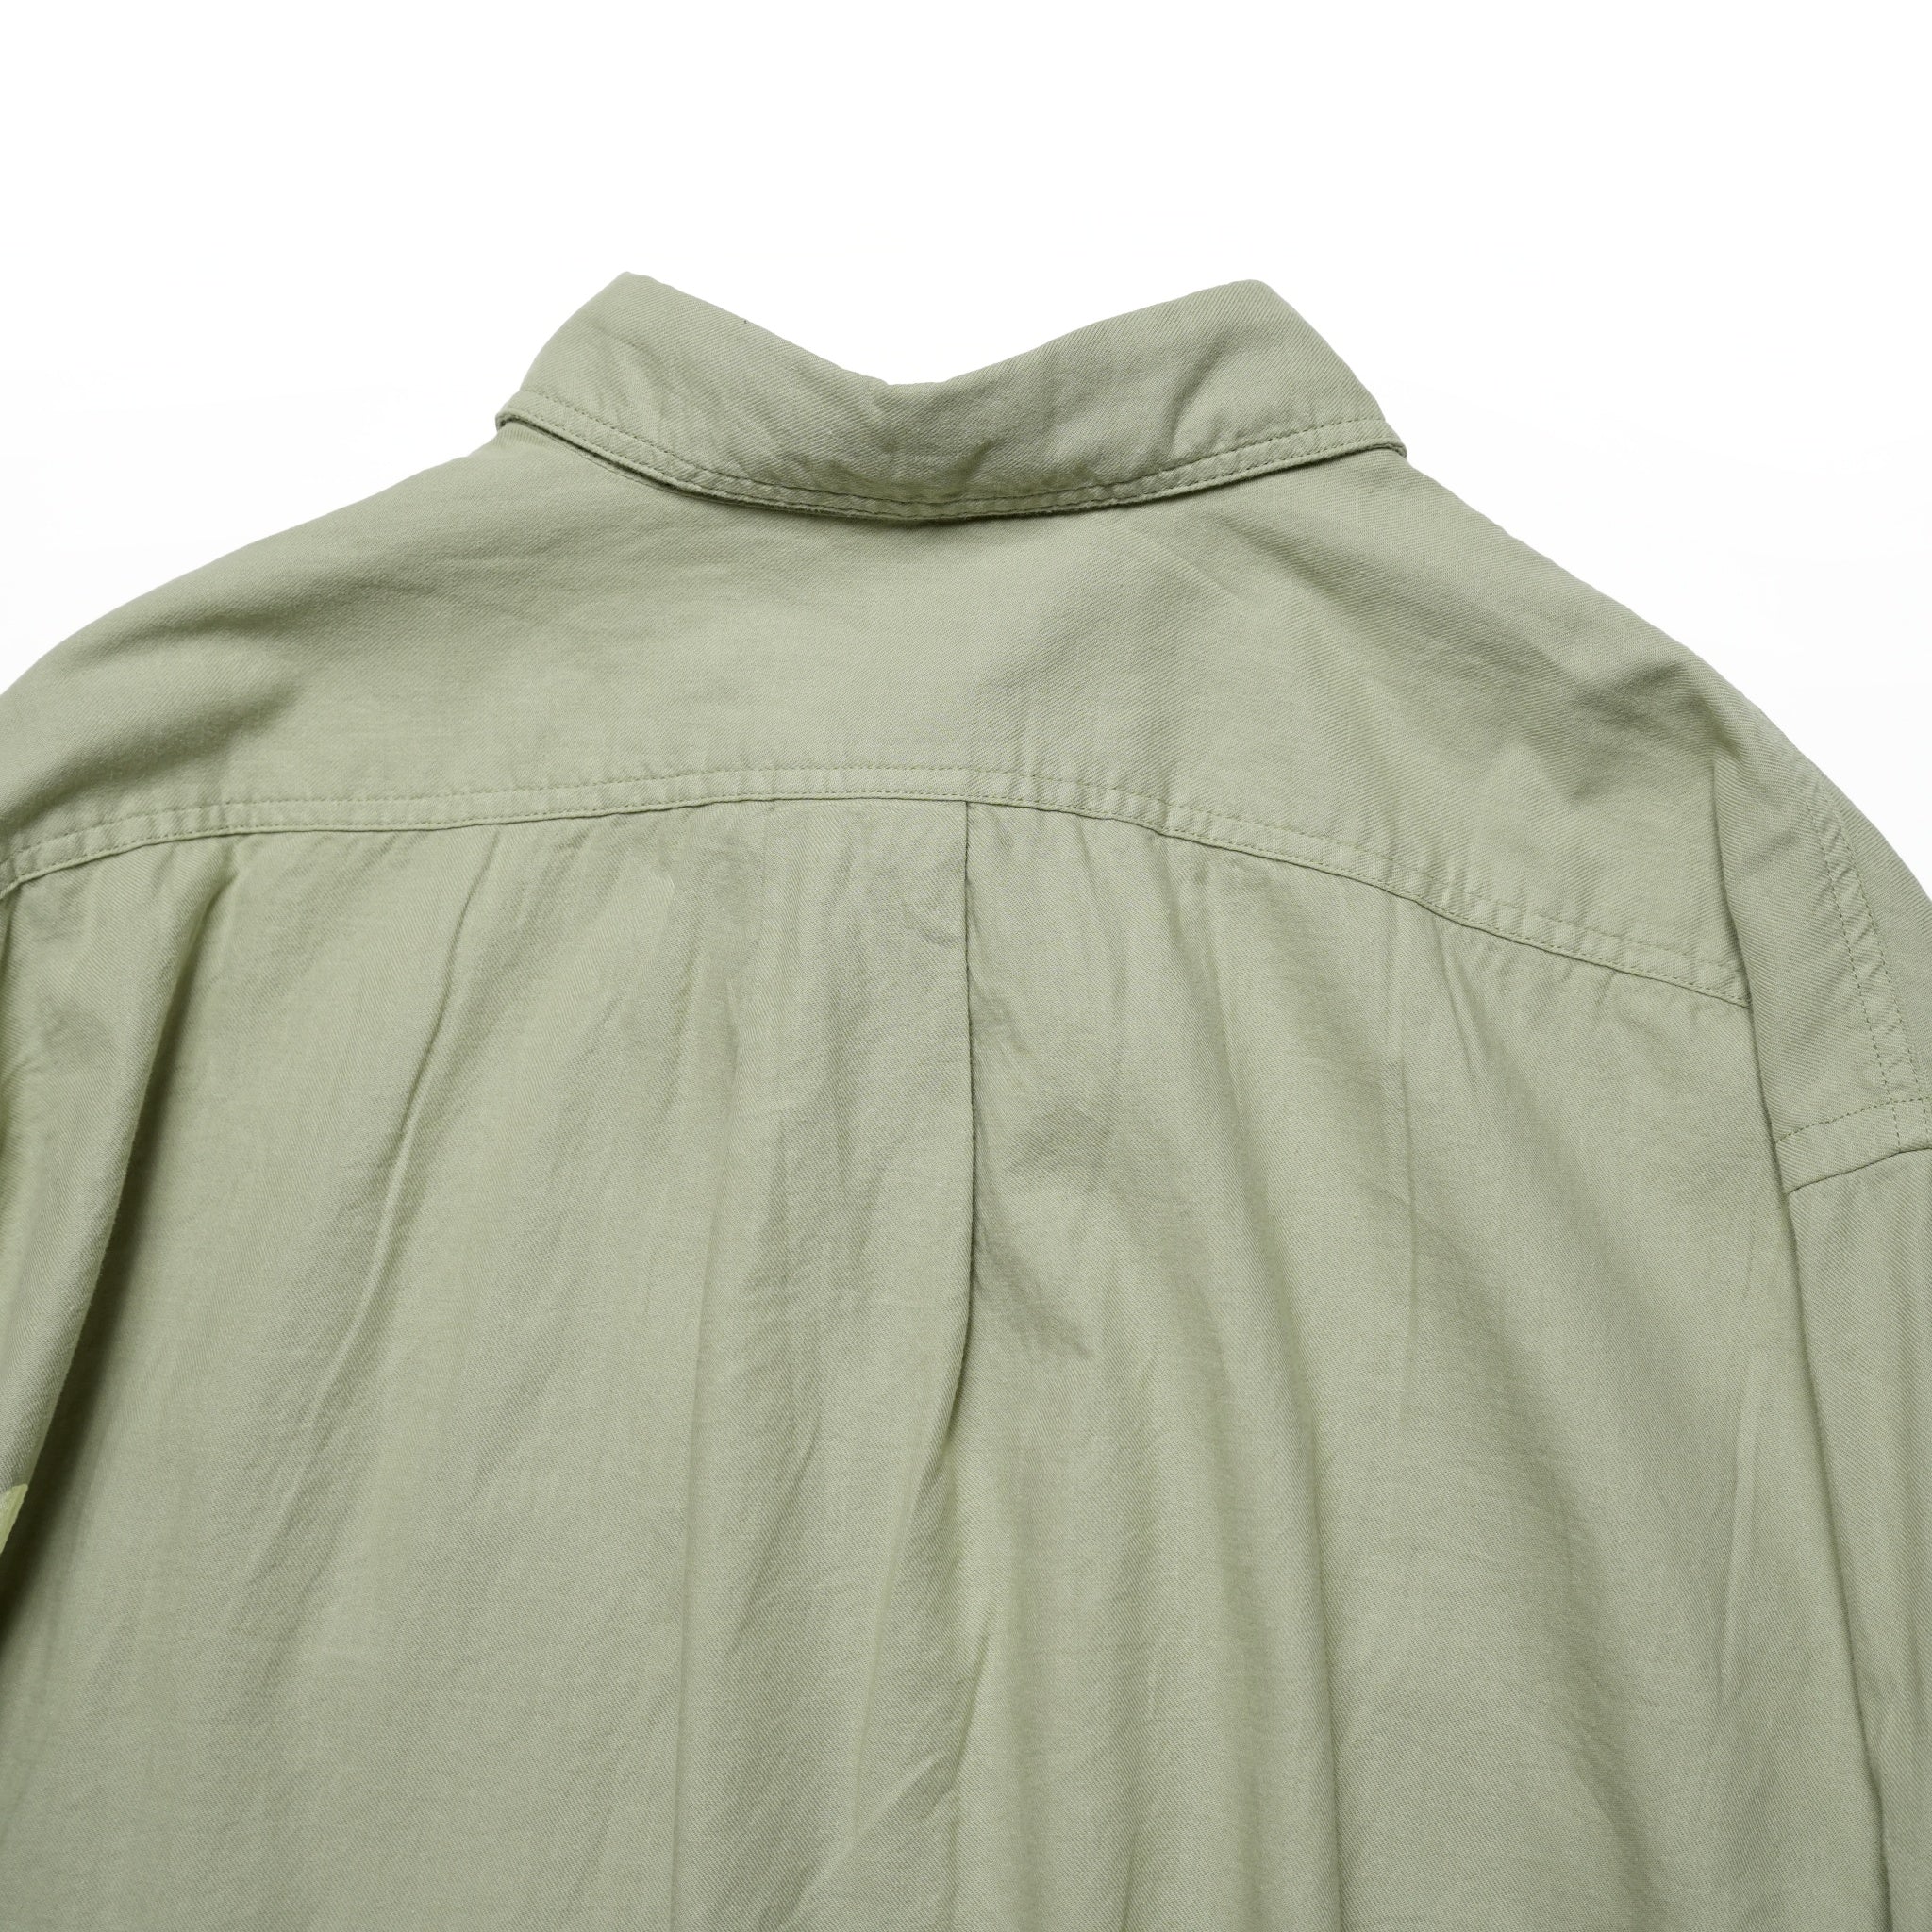 Name:OVER DYE SHIRT | Color:Sage | Size:Regular/Tall 【CITYLIGHTS PRODUCTS_シティライツプロダクツ】